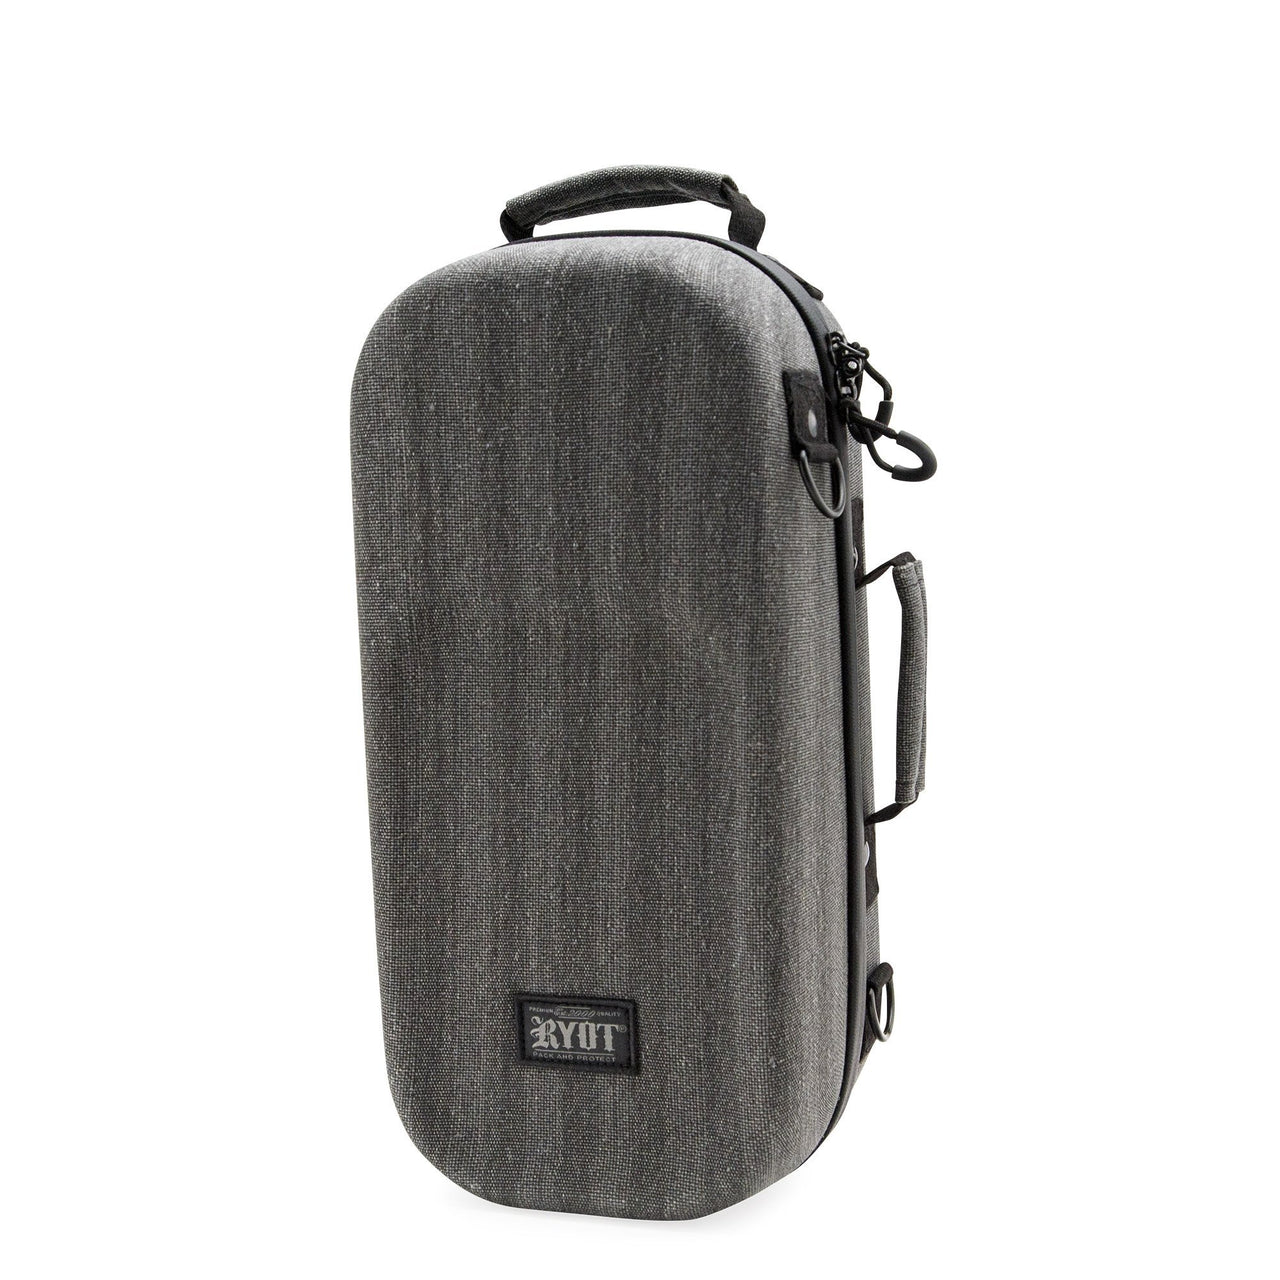 RYOT SmellSafe Carbon Series 14in Axe-Pack w/ NoGoo Mat & Combo Lock - 420 Science - The most trusted online smoke shop.